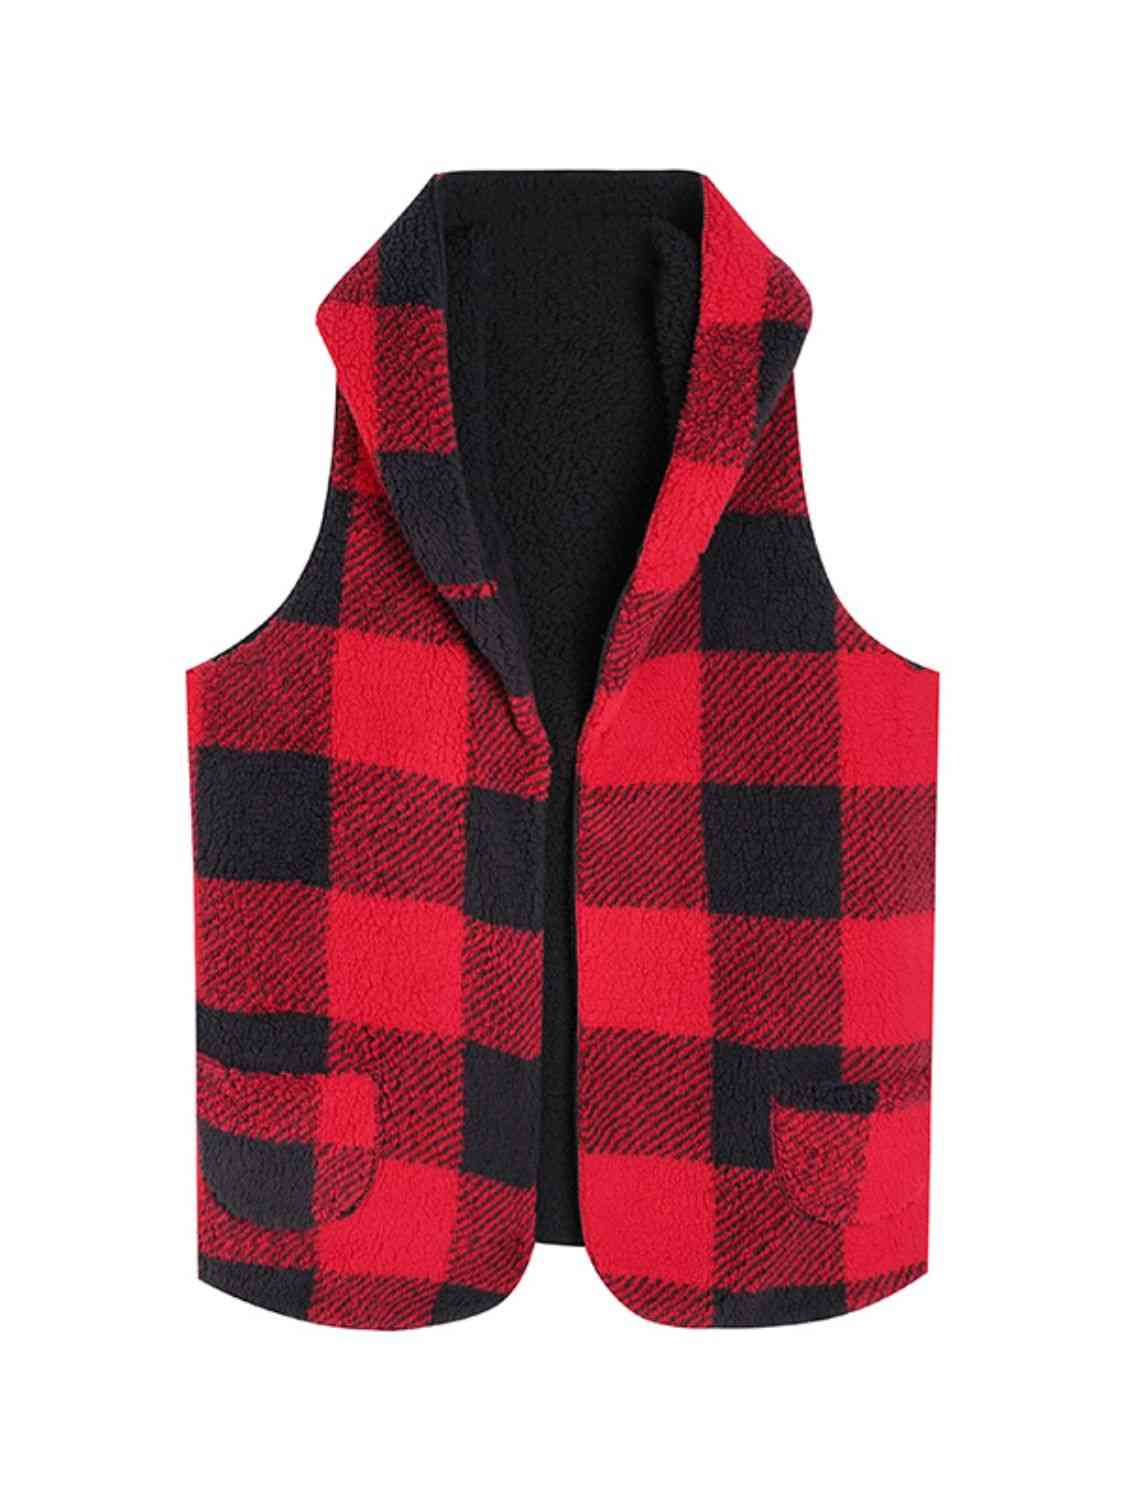 Plaid Hooded Vest - Crazy Like a Daisy Boutique #